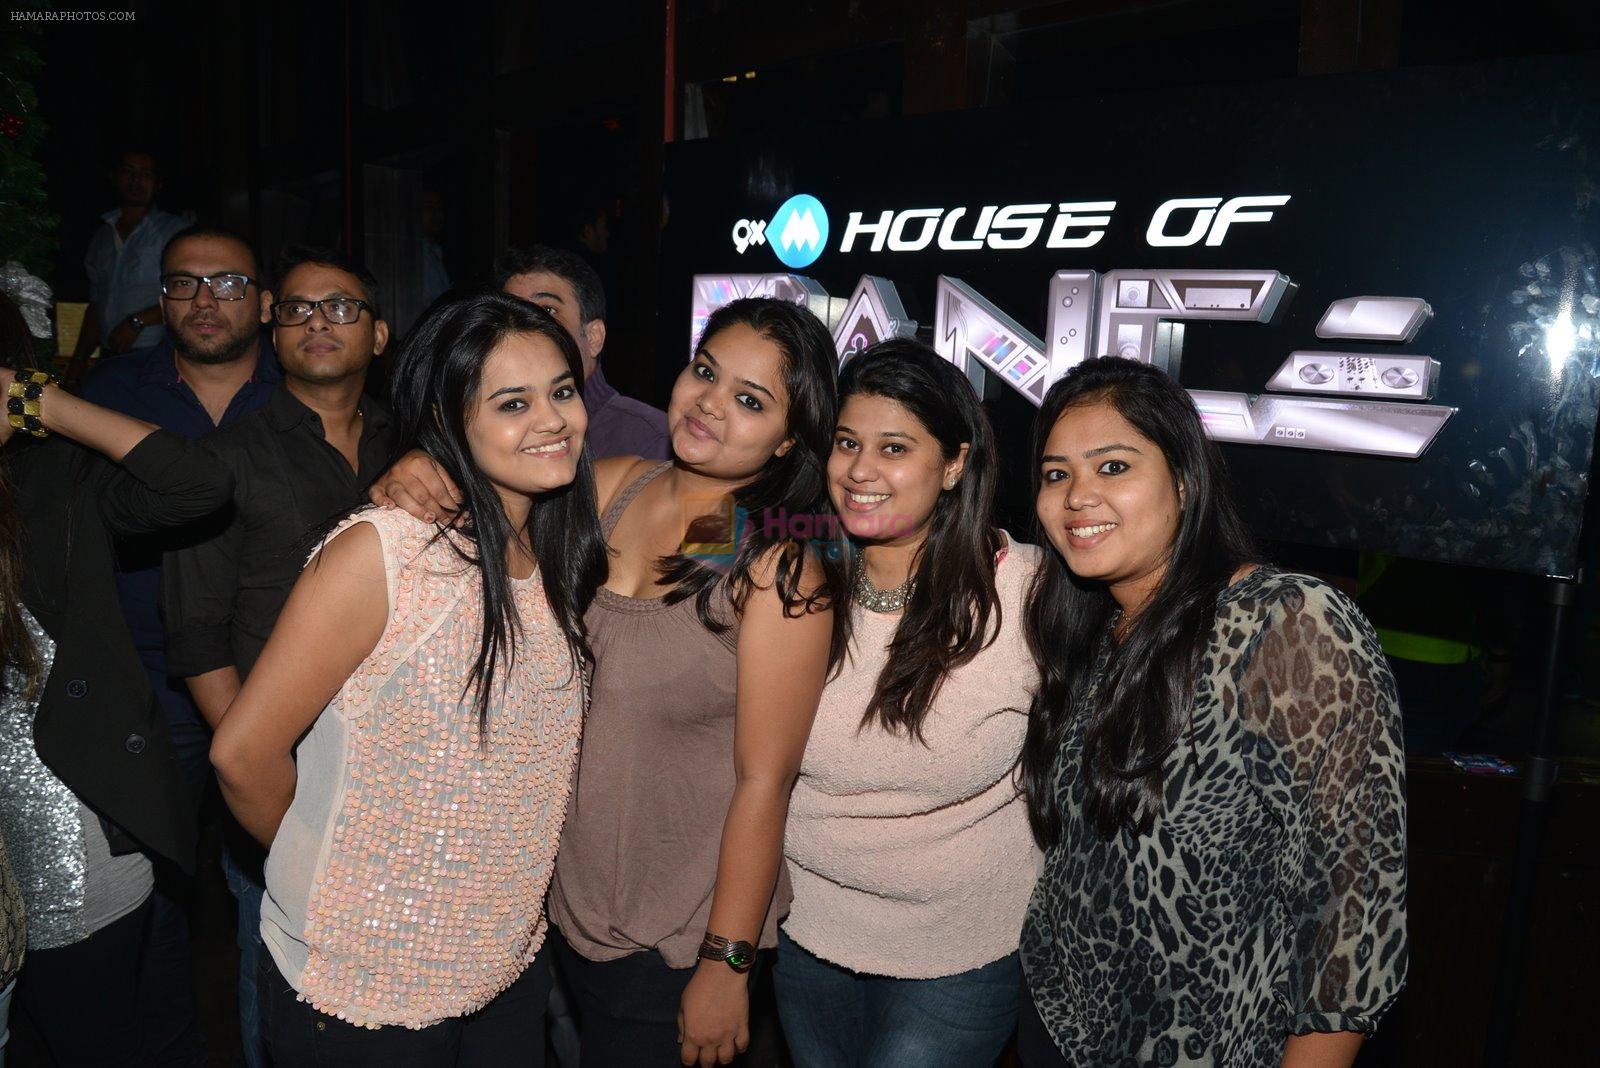 at 9XM House of Dance bash in Mumbai on 24th Dec 2014